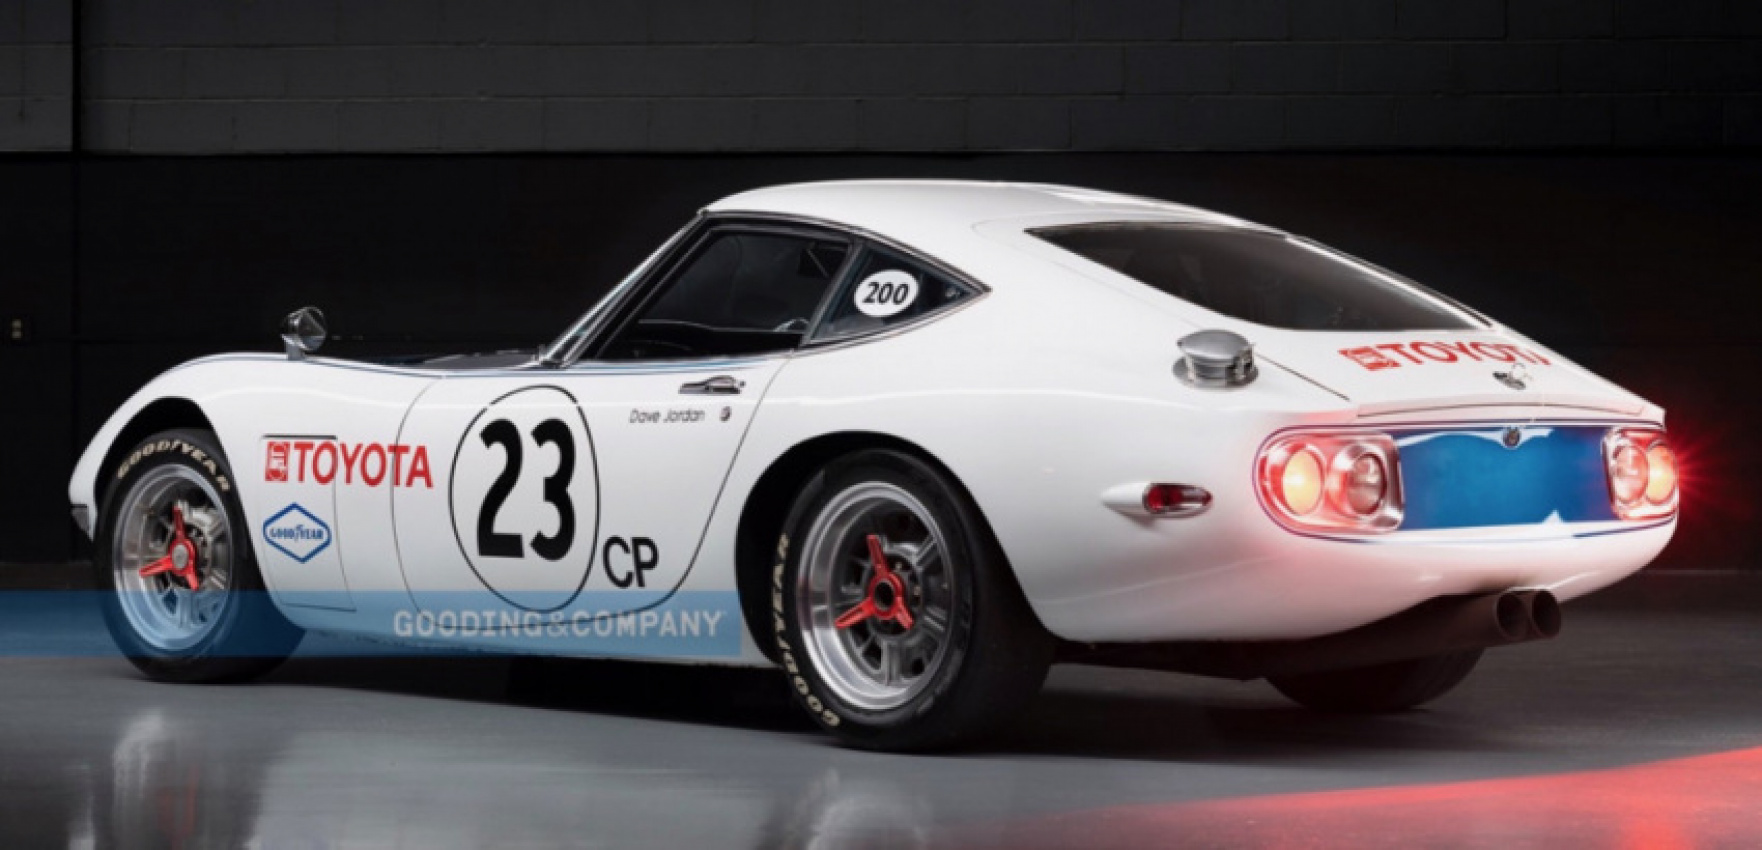 autos, cars, shelby, toyota, auctions, classic cars, gooding & company, race cars, racing, sports cars, toyota 2000 gt, toyota news, 1967 toyota-shelby 2000 gt headed for auction, lives in our dreams